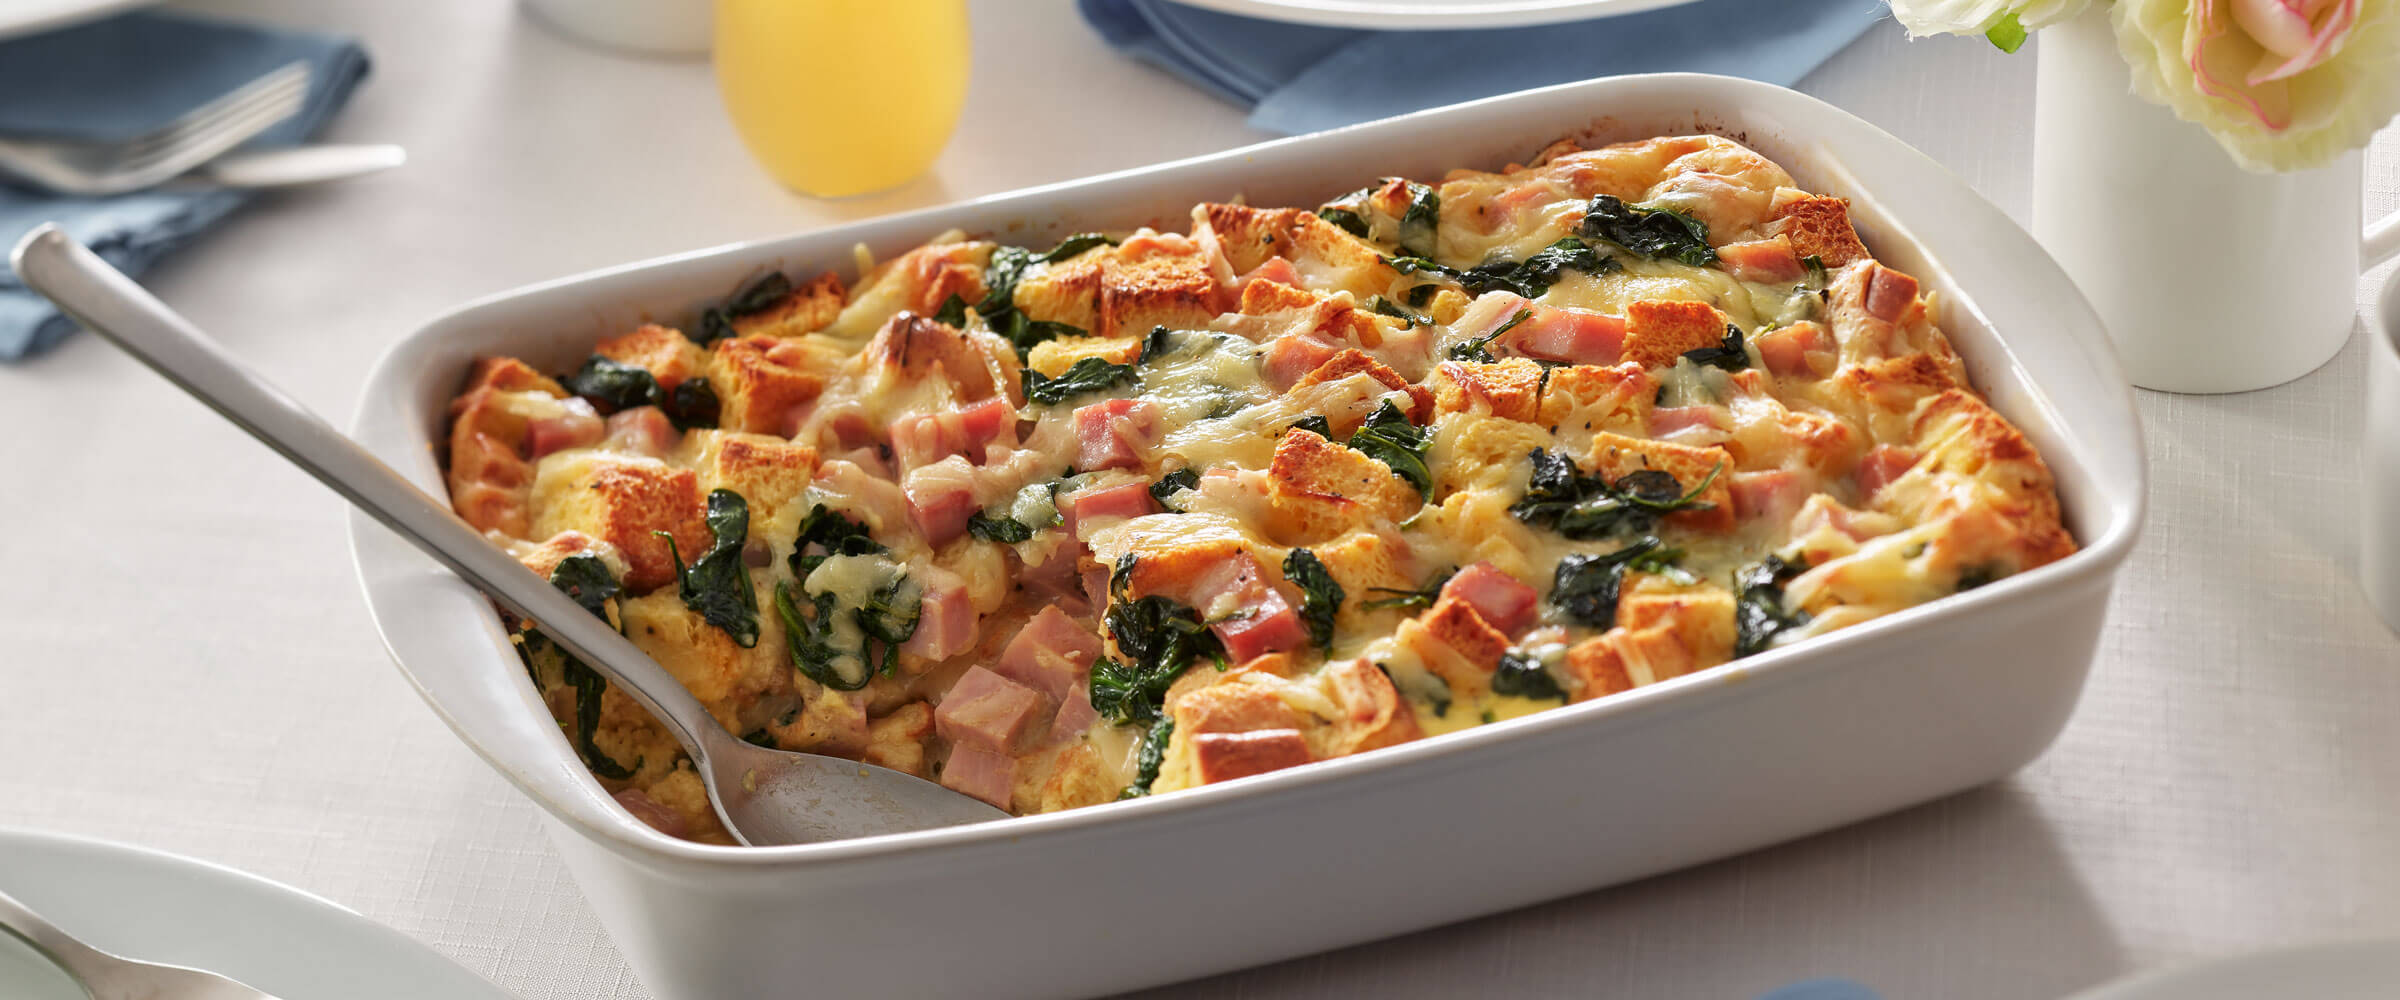 Ham, Spinach and Gruyere Strata in white dish with serving spoon